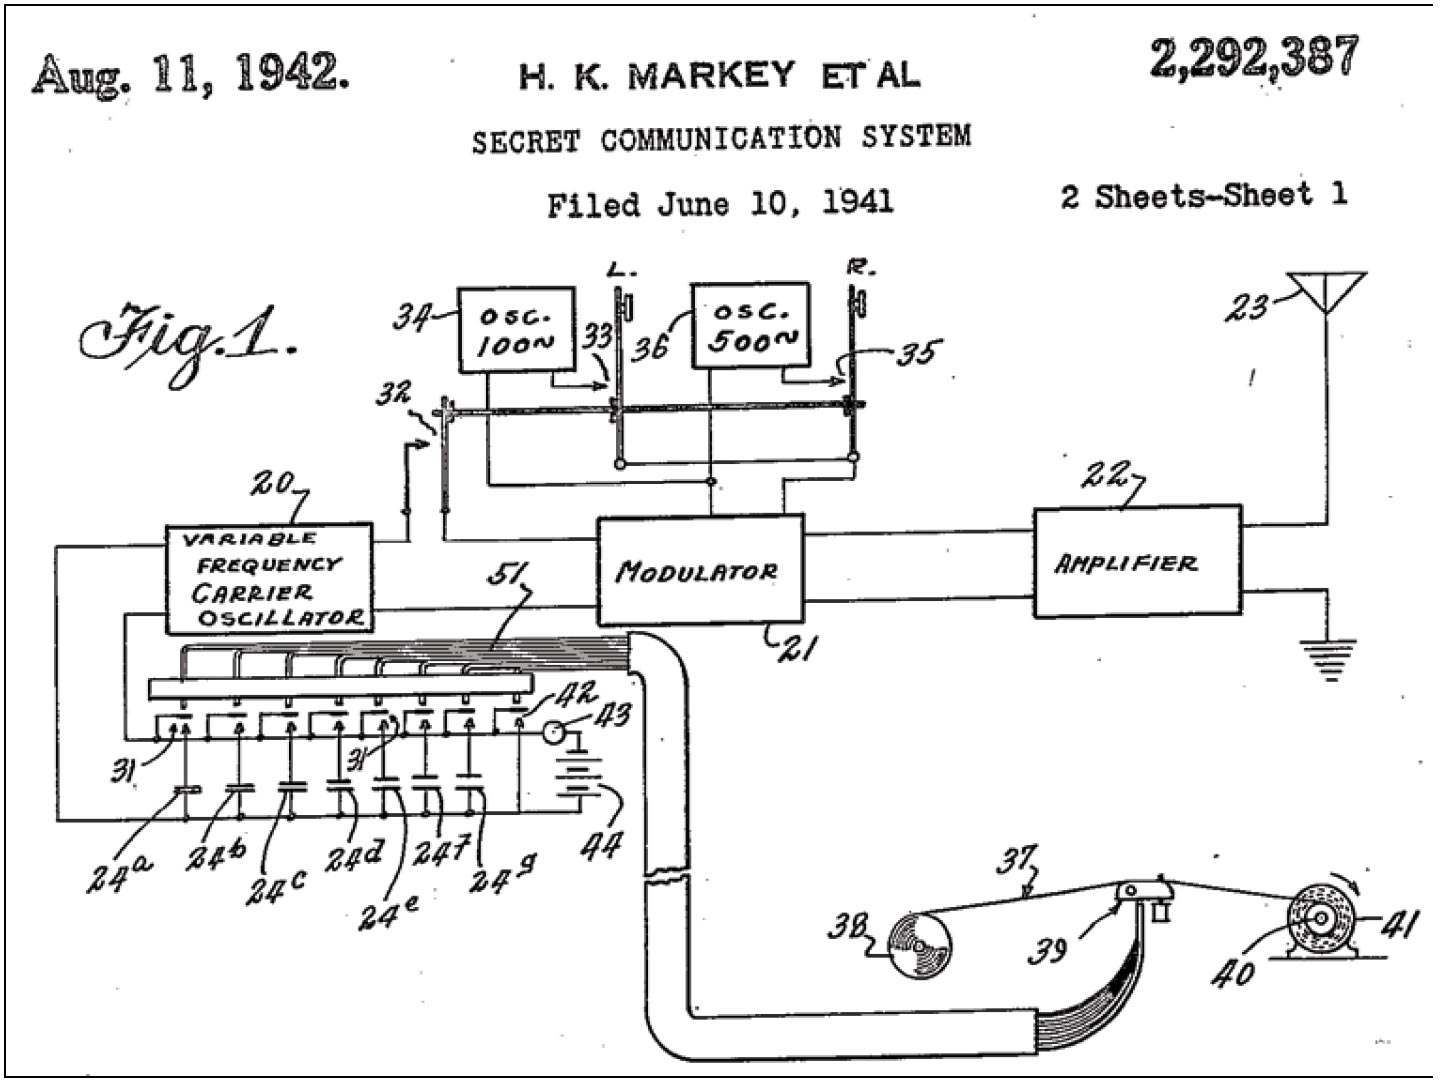 Figure 13 Hedy Lamarr co-authored US Patent 2,292,387 which served as a foundation to the spread spectrum communications we use today